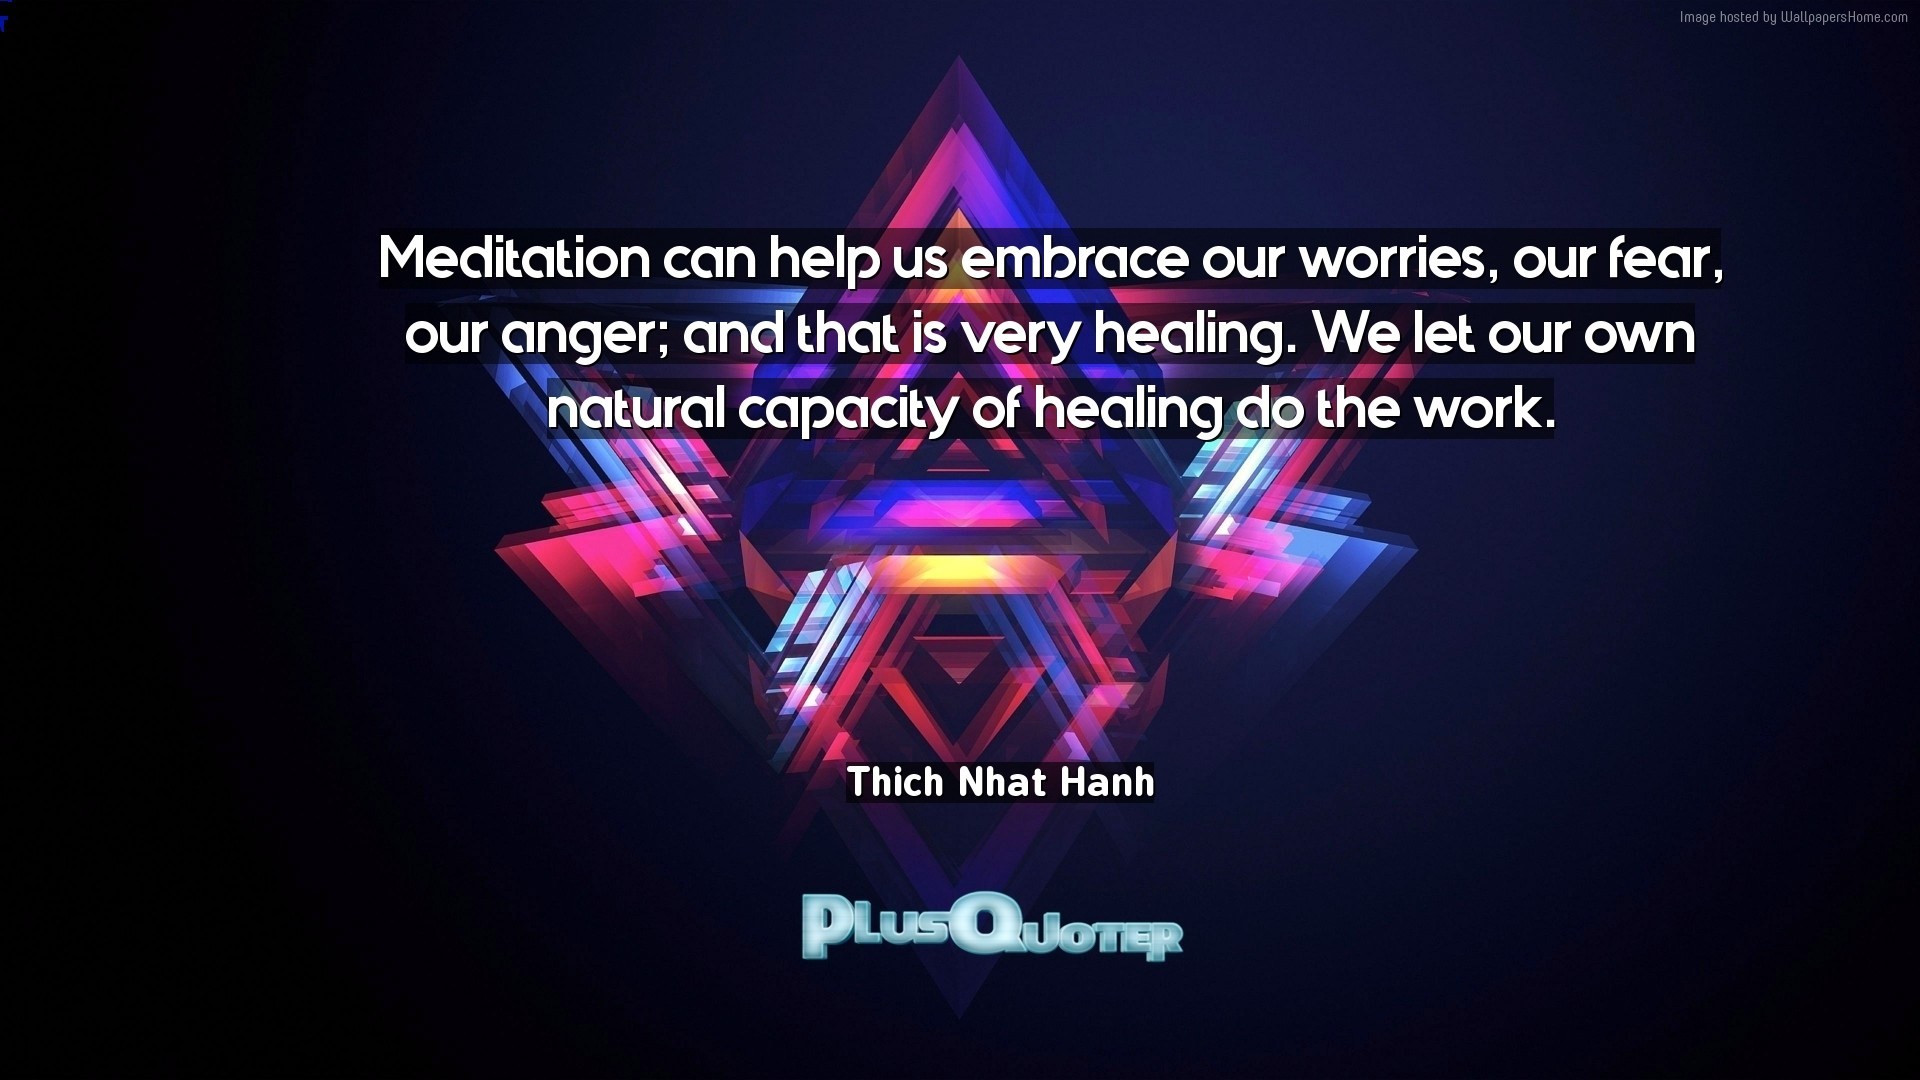 1920x1080 Download Wallpaper with inspirational Quotes- "Meditation can help us  embrace our worries, our